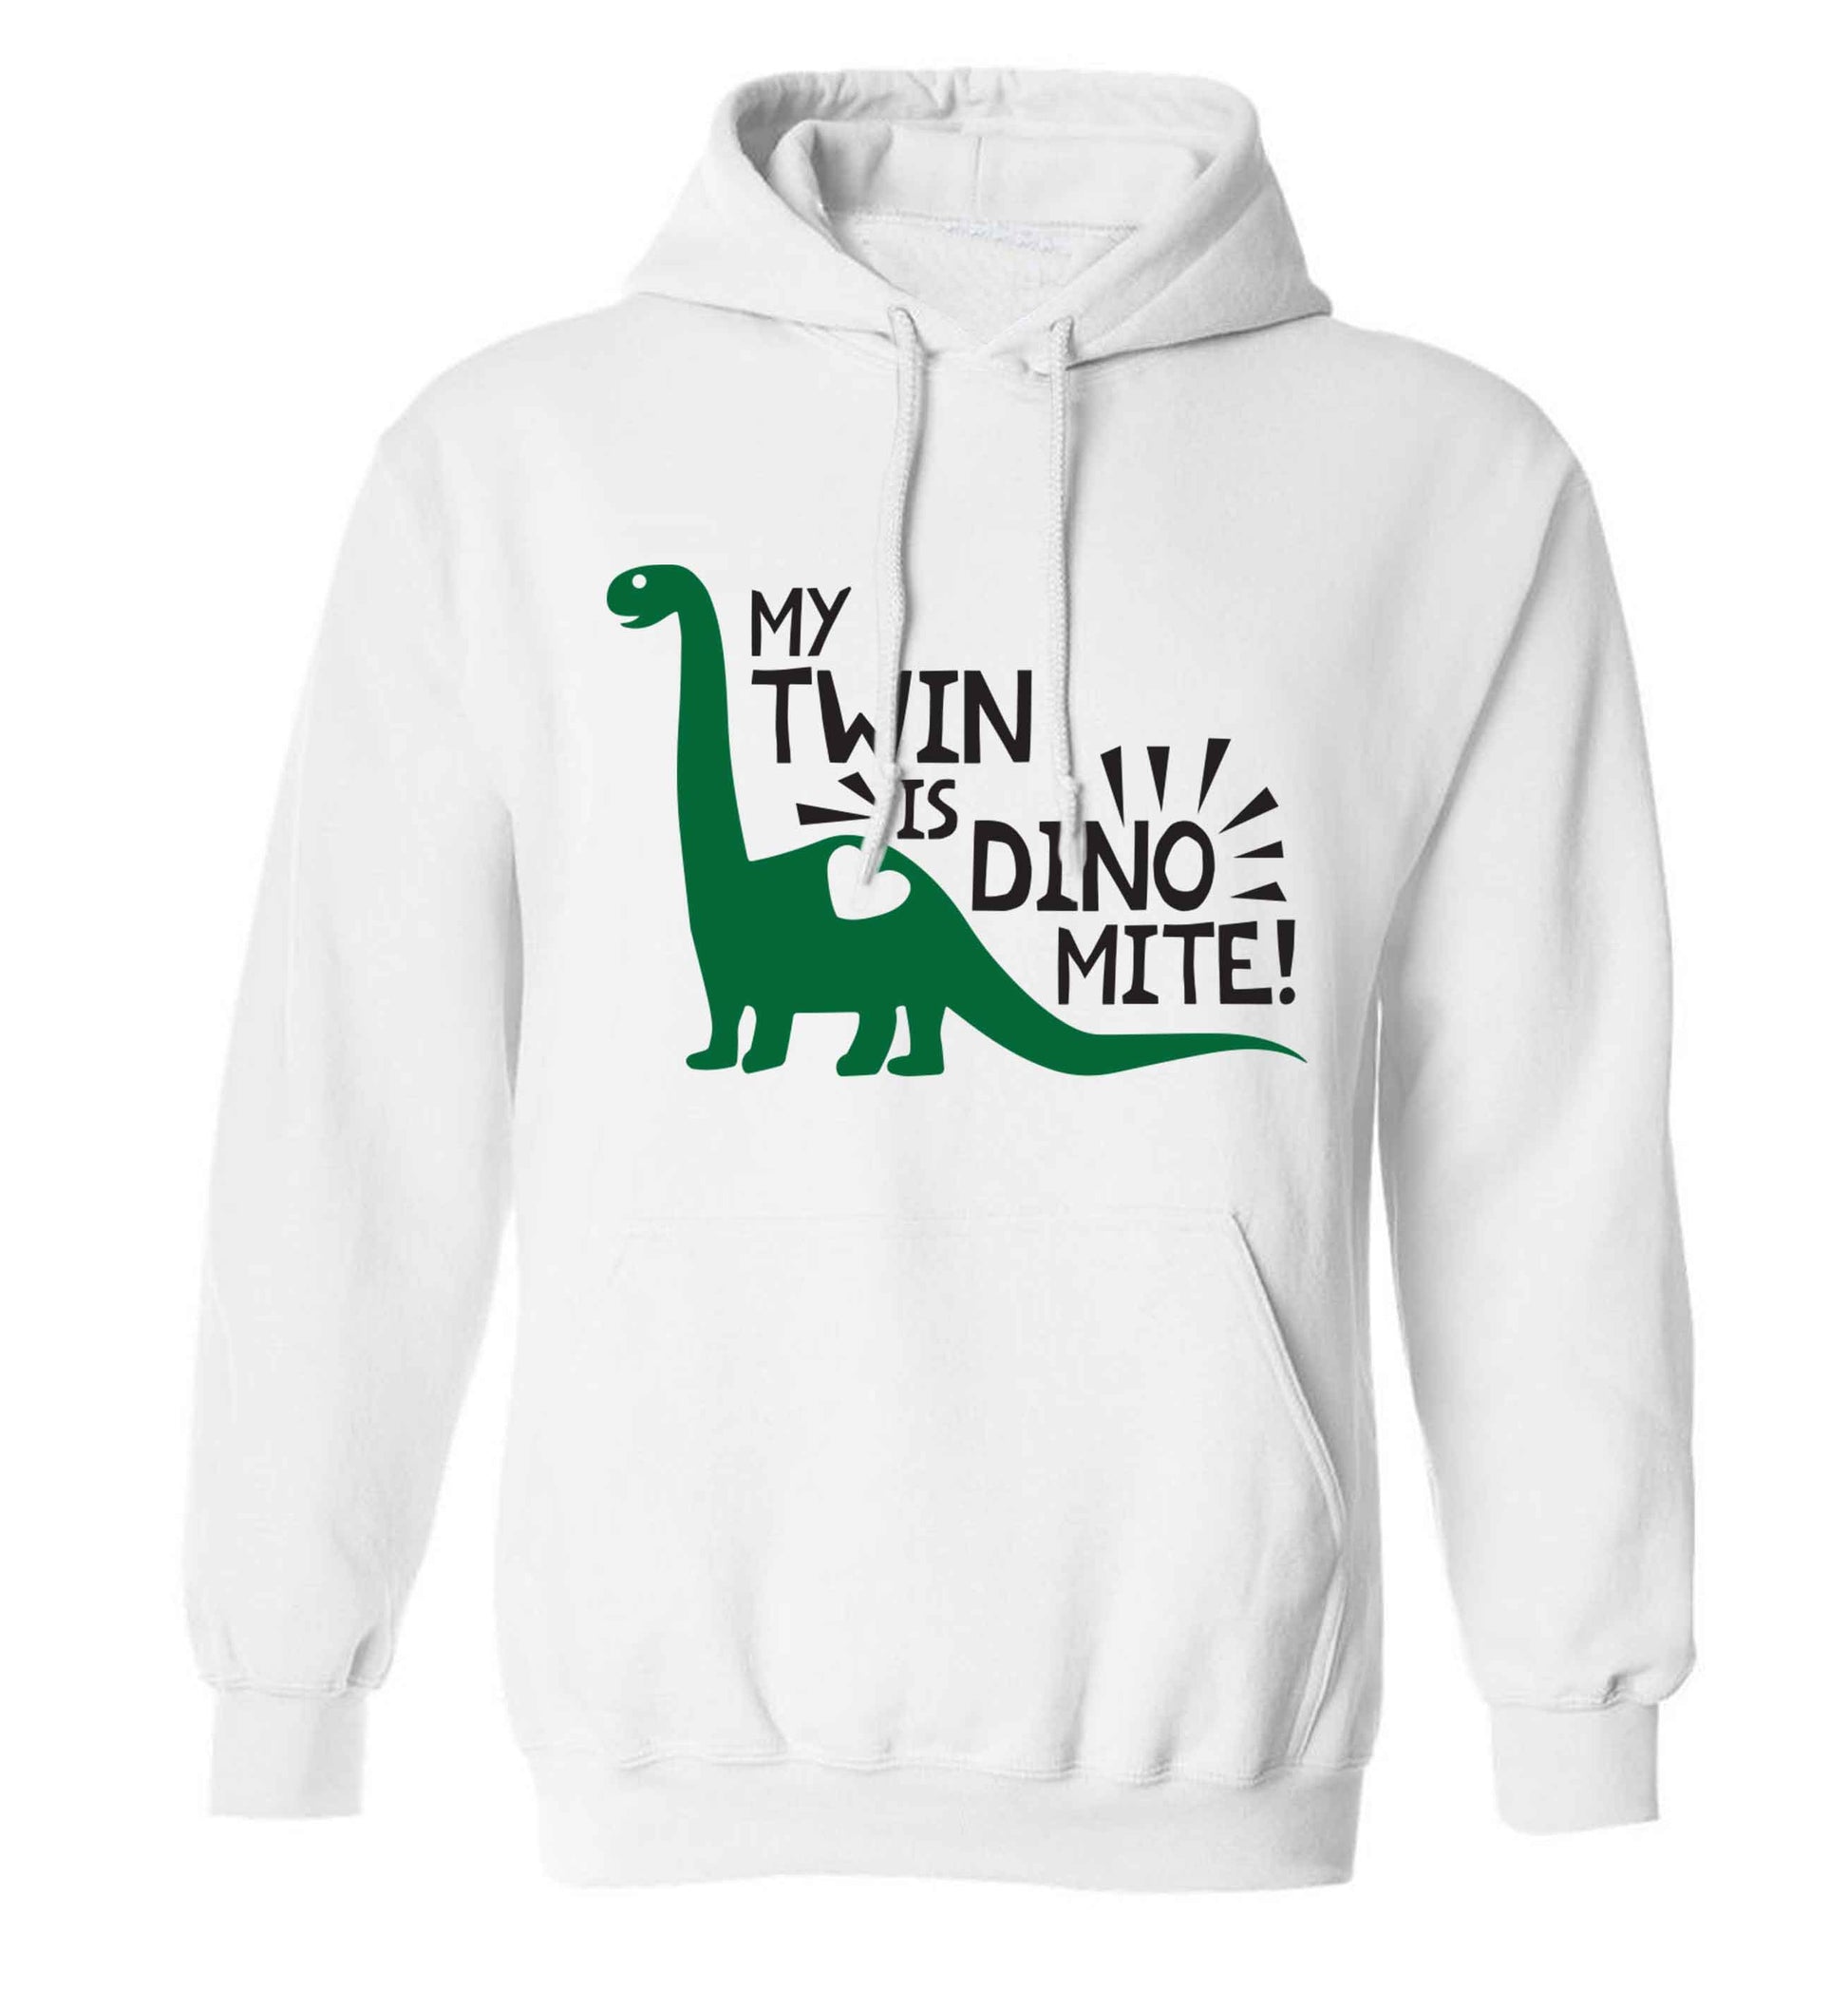 My twin is dinomite! adults unisex white hoodie 2XL